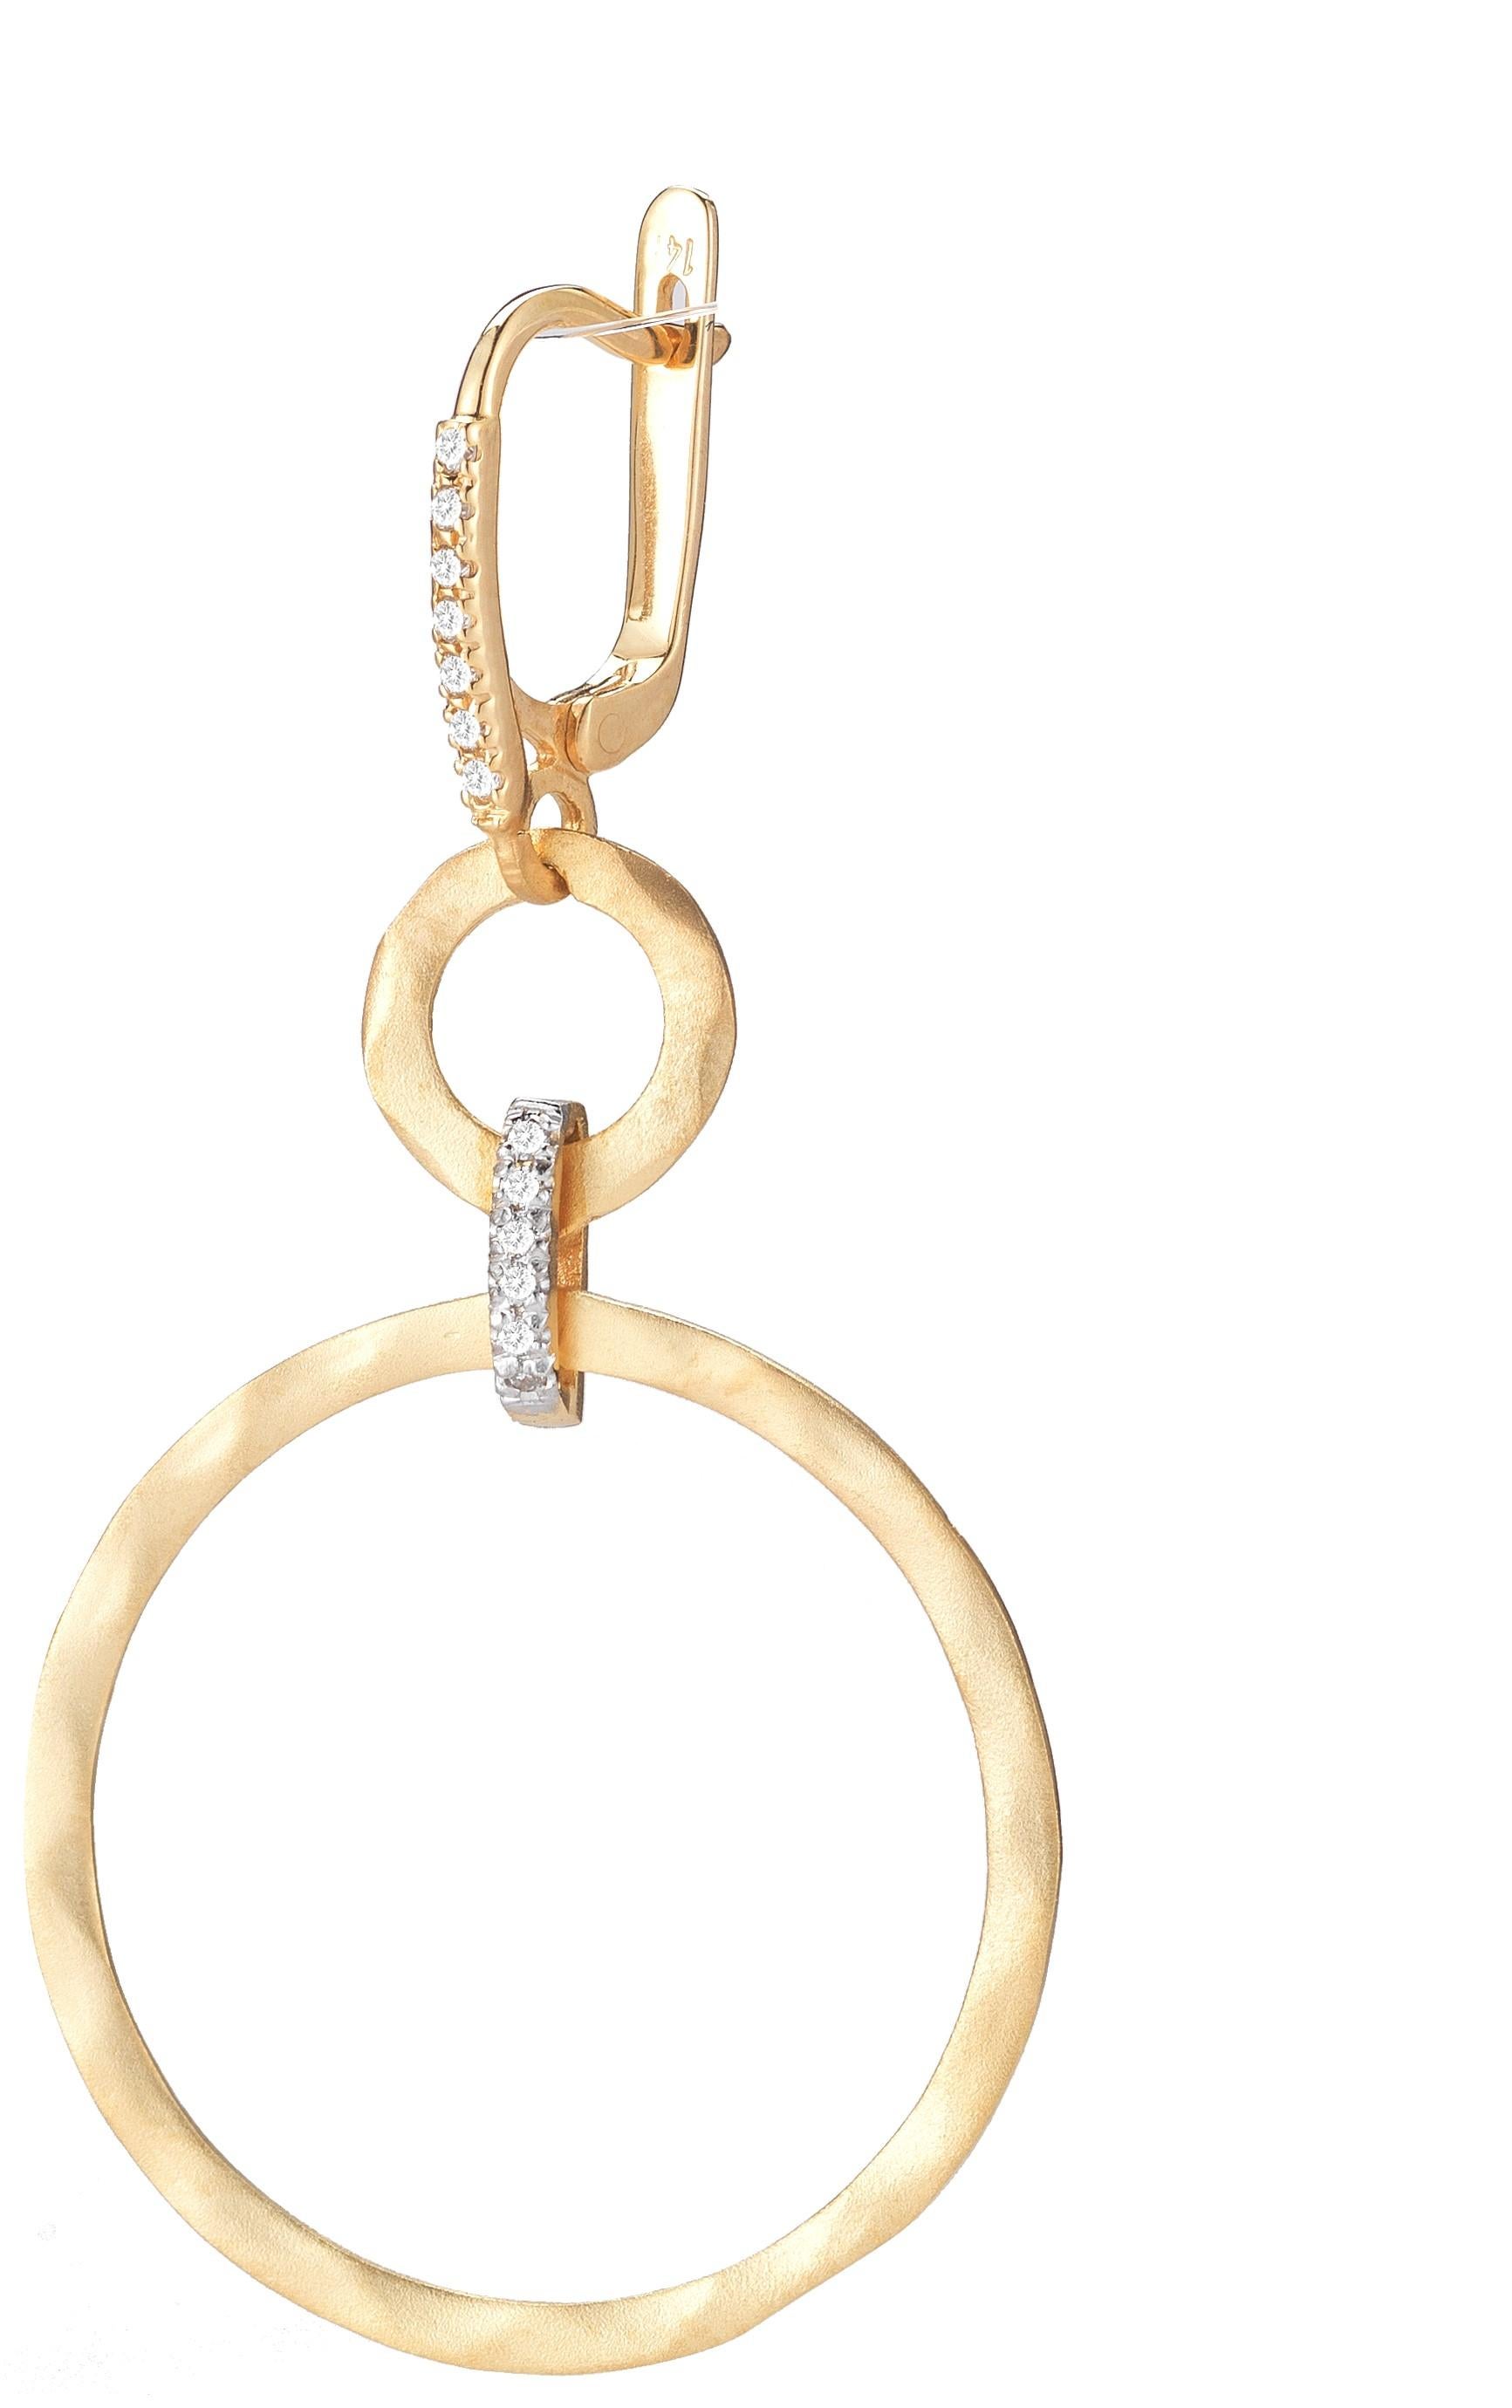 14 Karat Yellow Gold Hand-Crafted Matte and Hammer-Finished Open-Circle Drop Earrings, Accented with 0.18 Carats of Pave Set Diamonds and Lever Back Closures.
